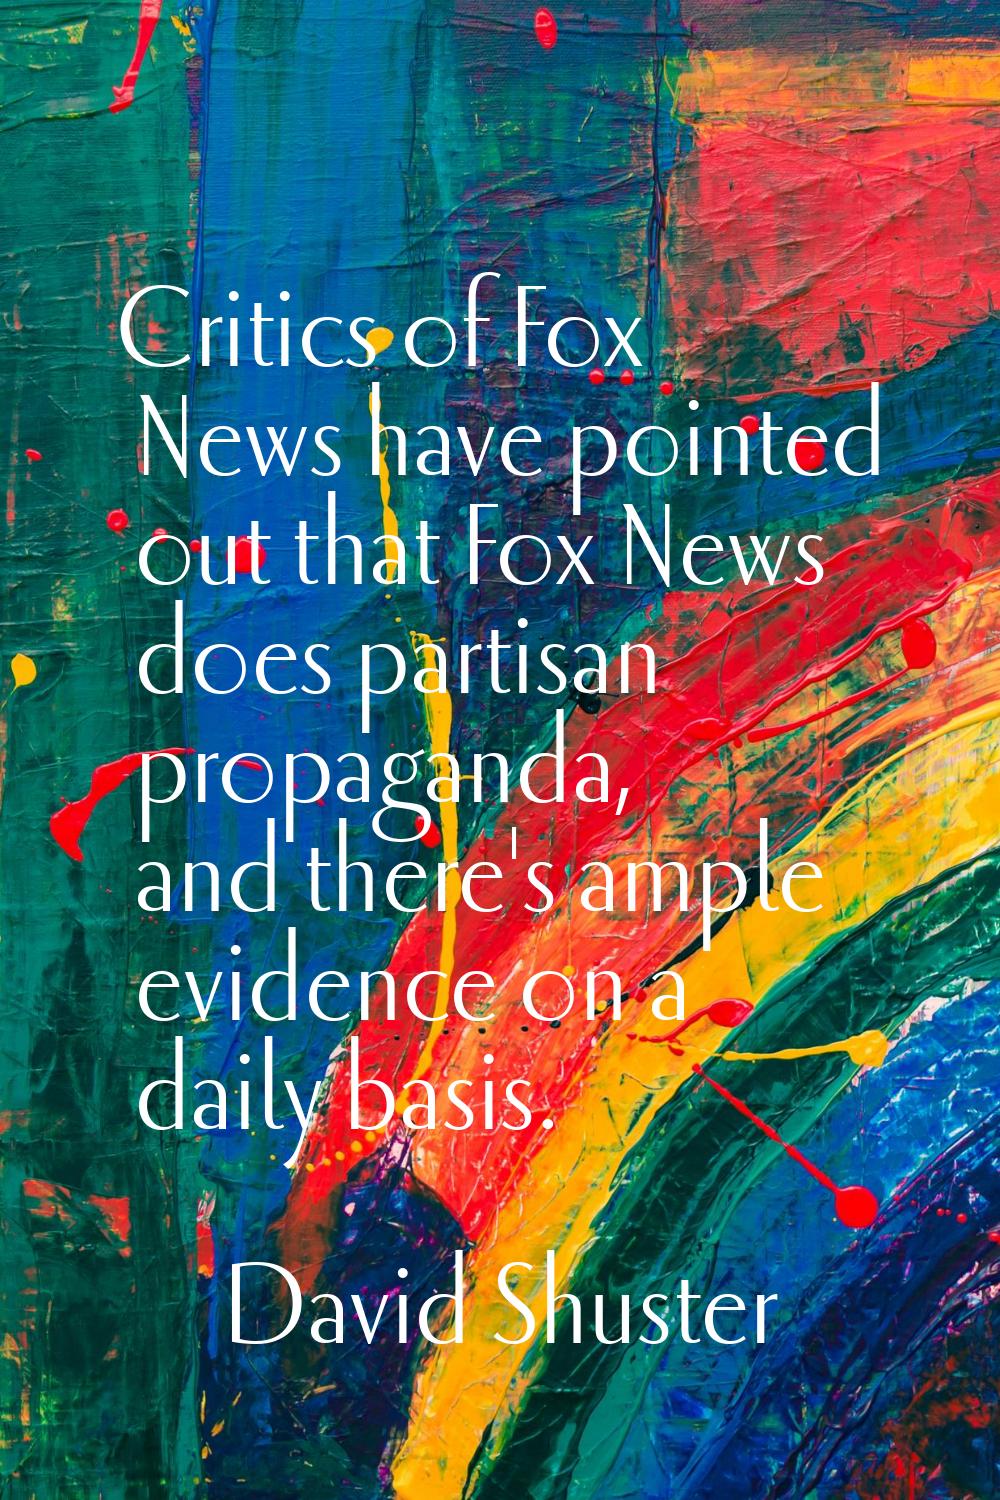 Critics of Fox News have pointed out that Fox News does partisan propaganda, and there's ample evid